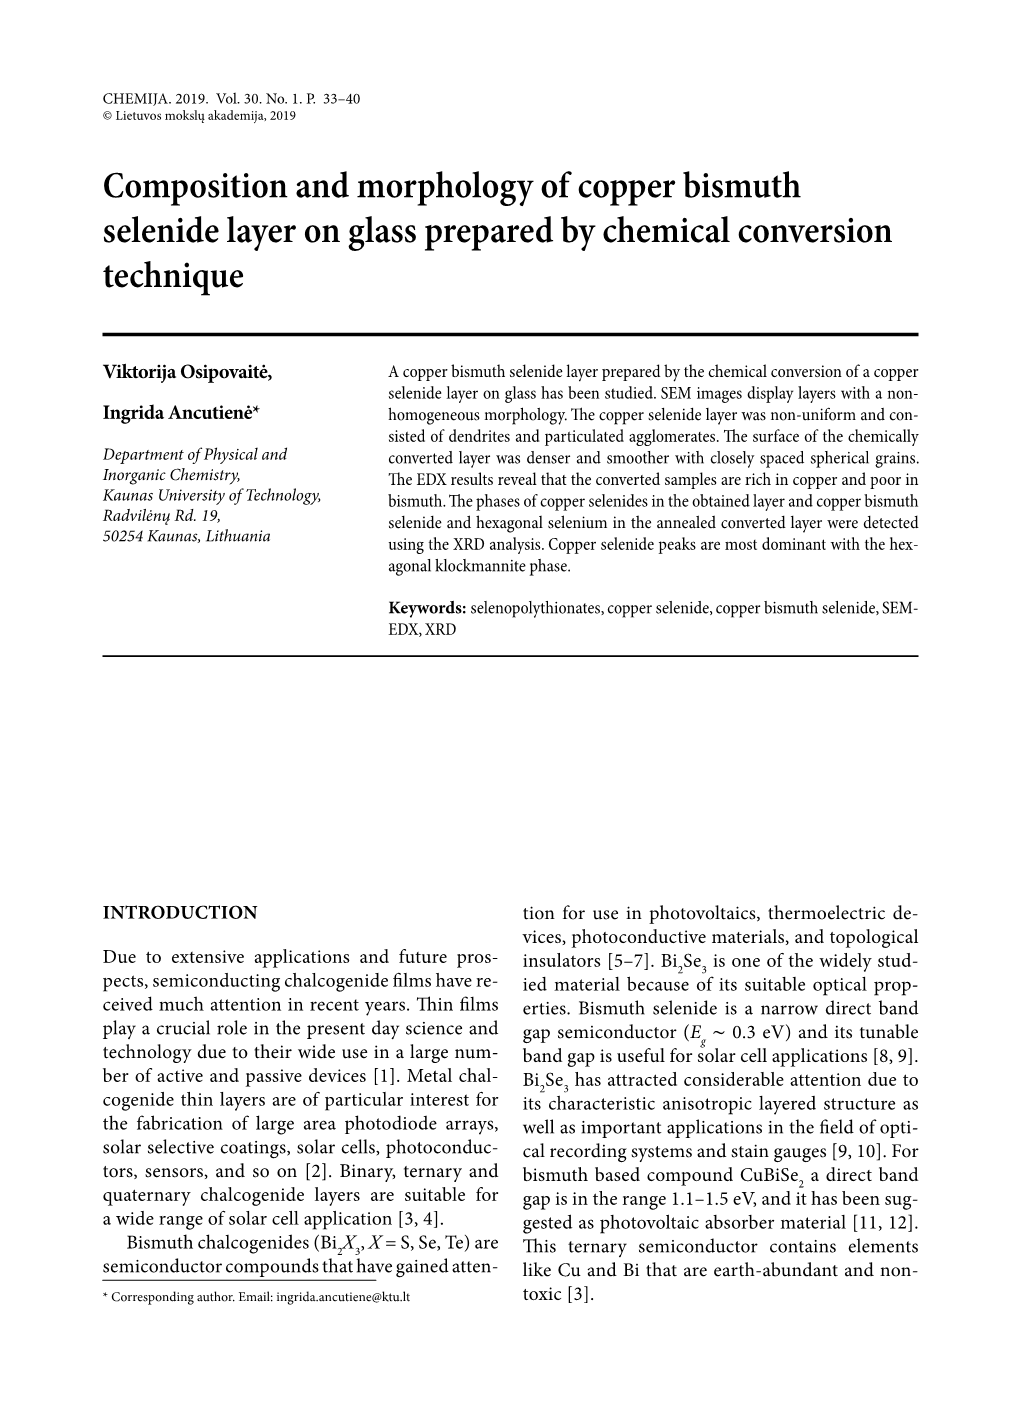 Composition and Morphology of Copper Bismuth Selenide Layer on Glass Prepared by Chemical Conversion Technique